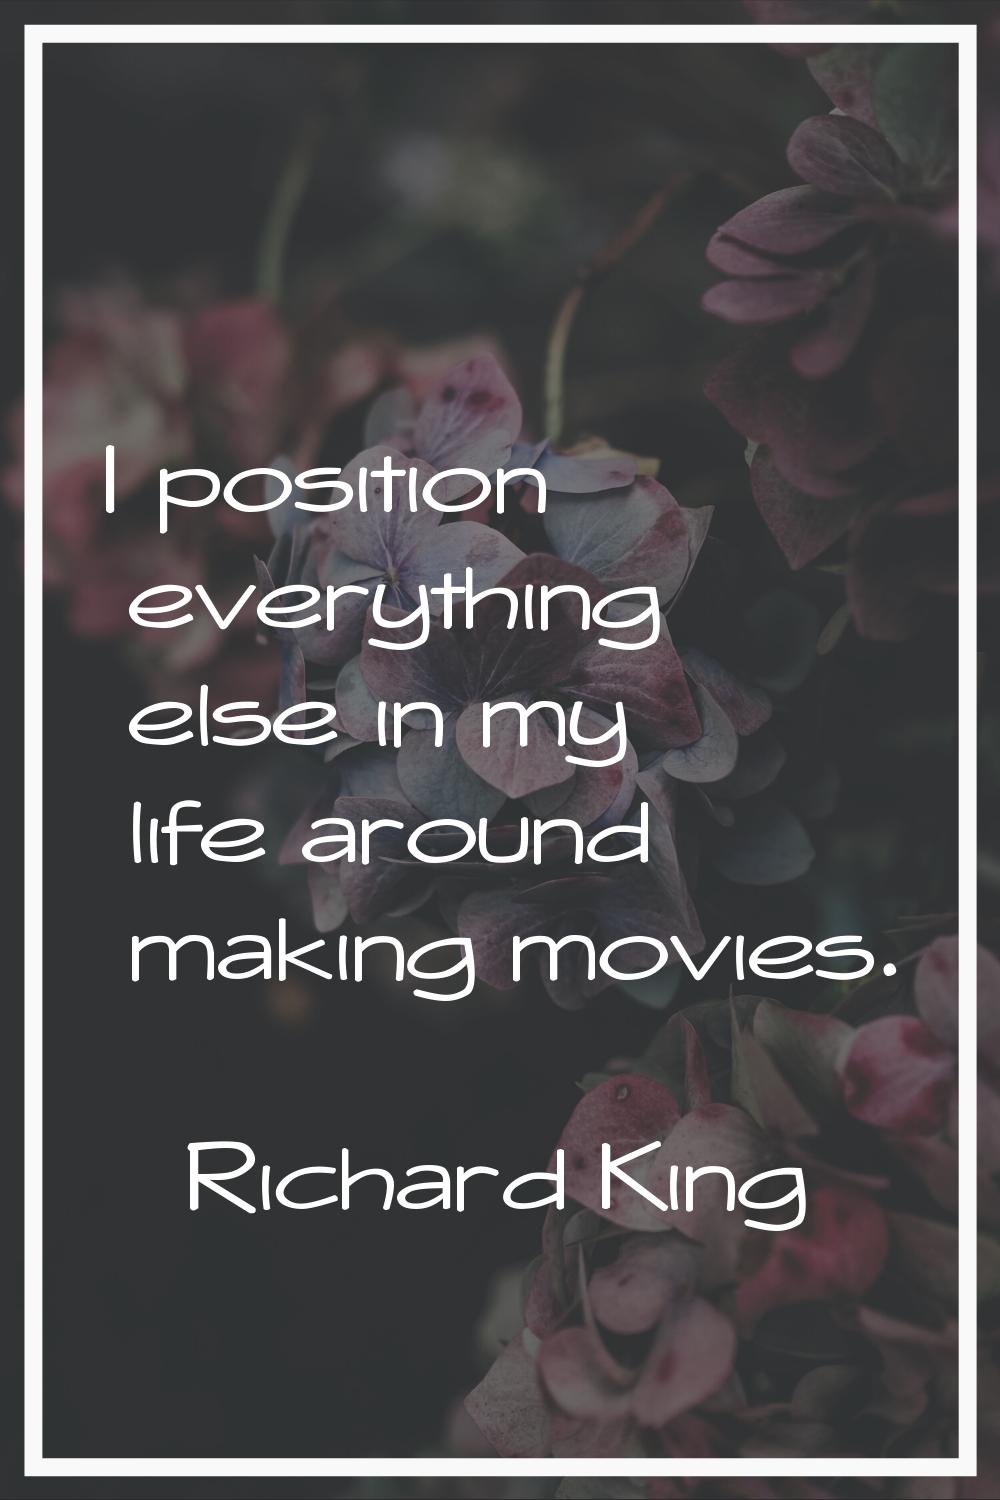 I position everything else in my life around making movies.